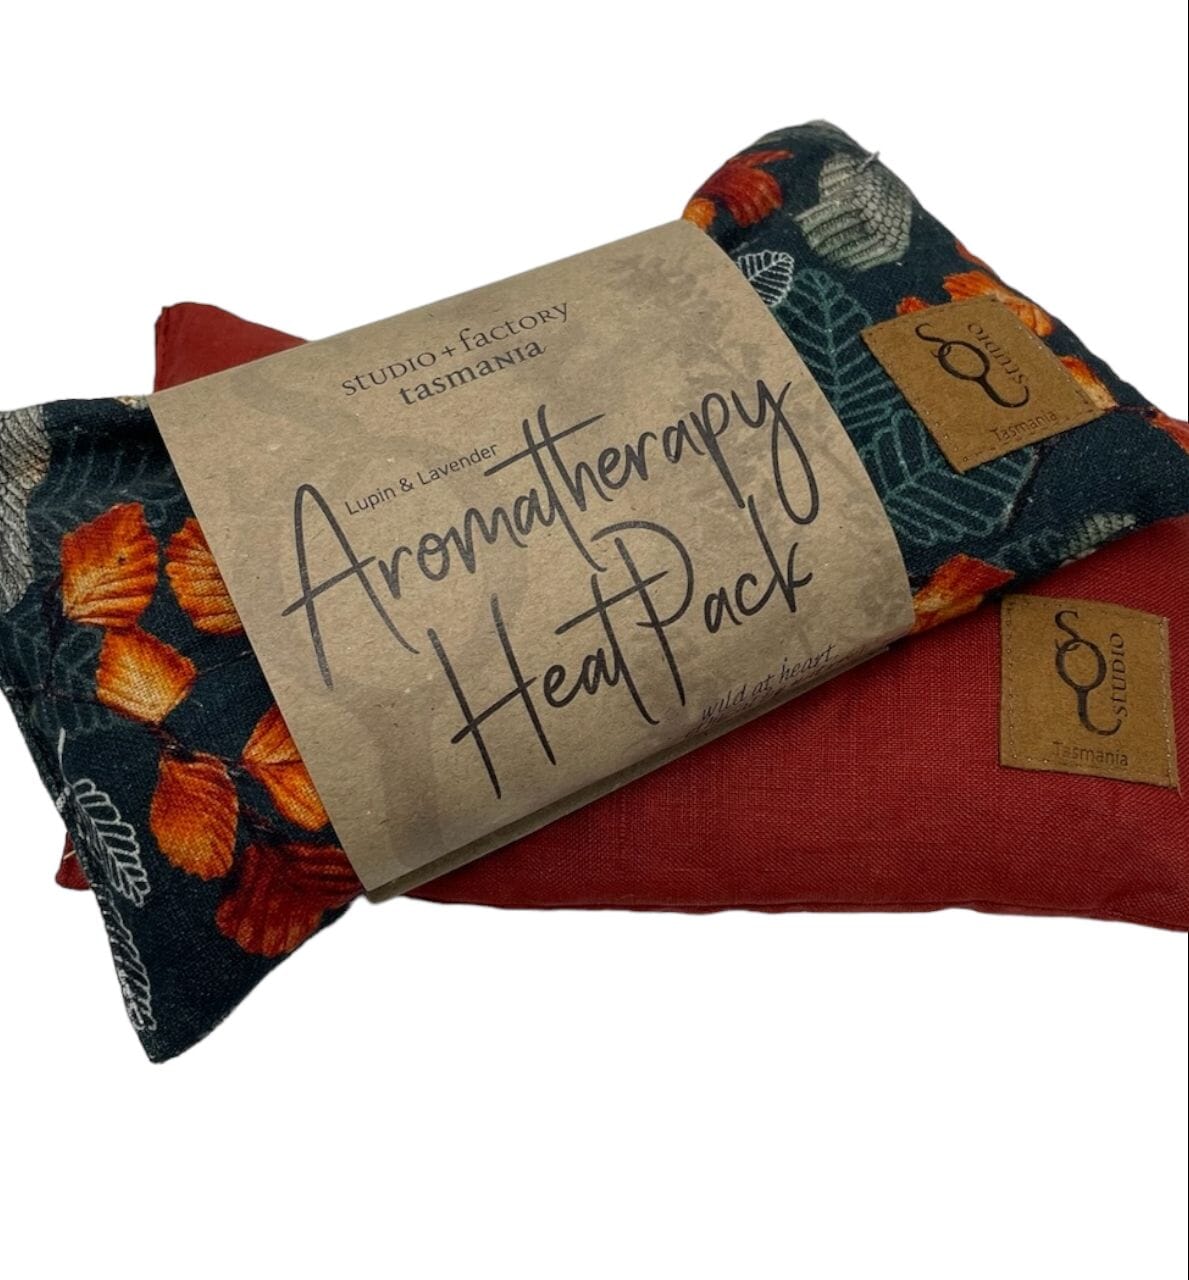 Aromatherapy Heat/Cold pack - Lupin & Lavender Heating Pads The Spotted Quoll Double Trouble Fagus / Rust Sheen 